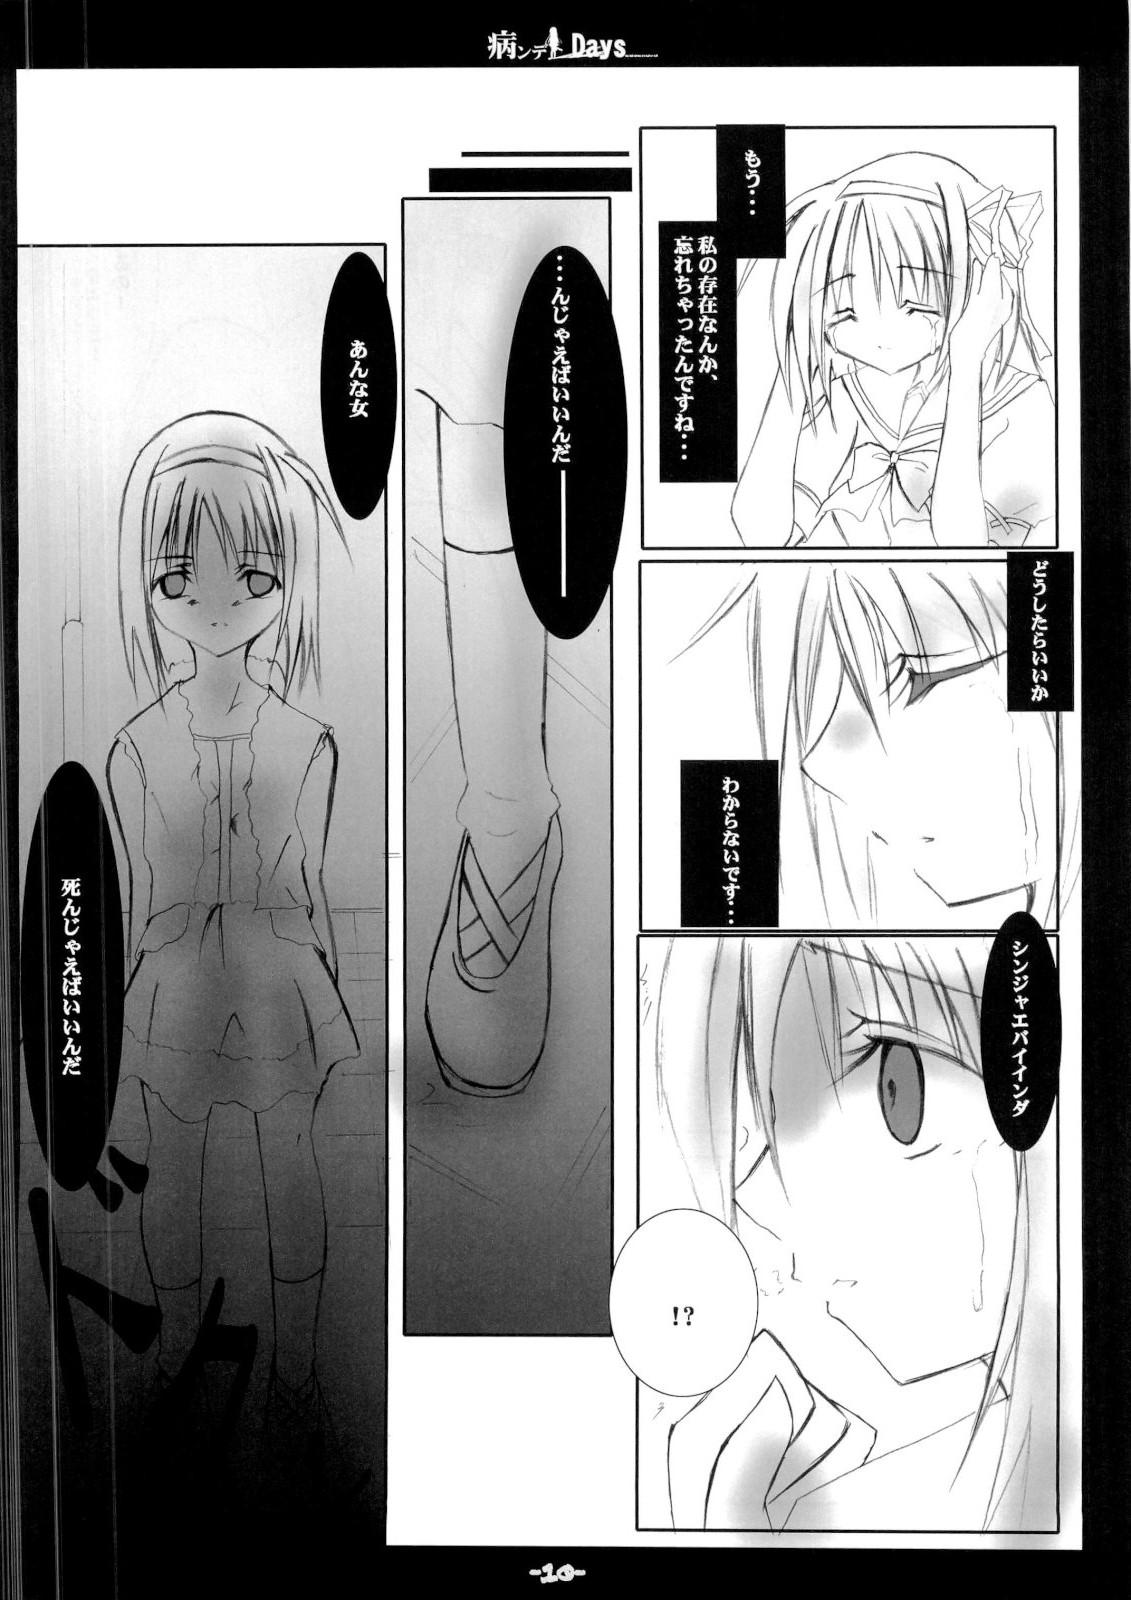 Pussy Licking Yandere Days - School days Shuffle Bribe - Page 9